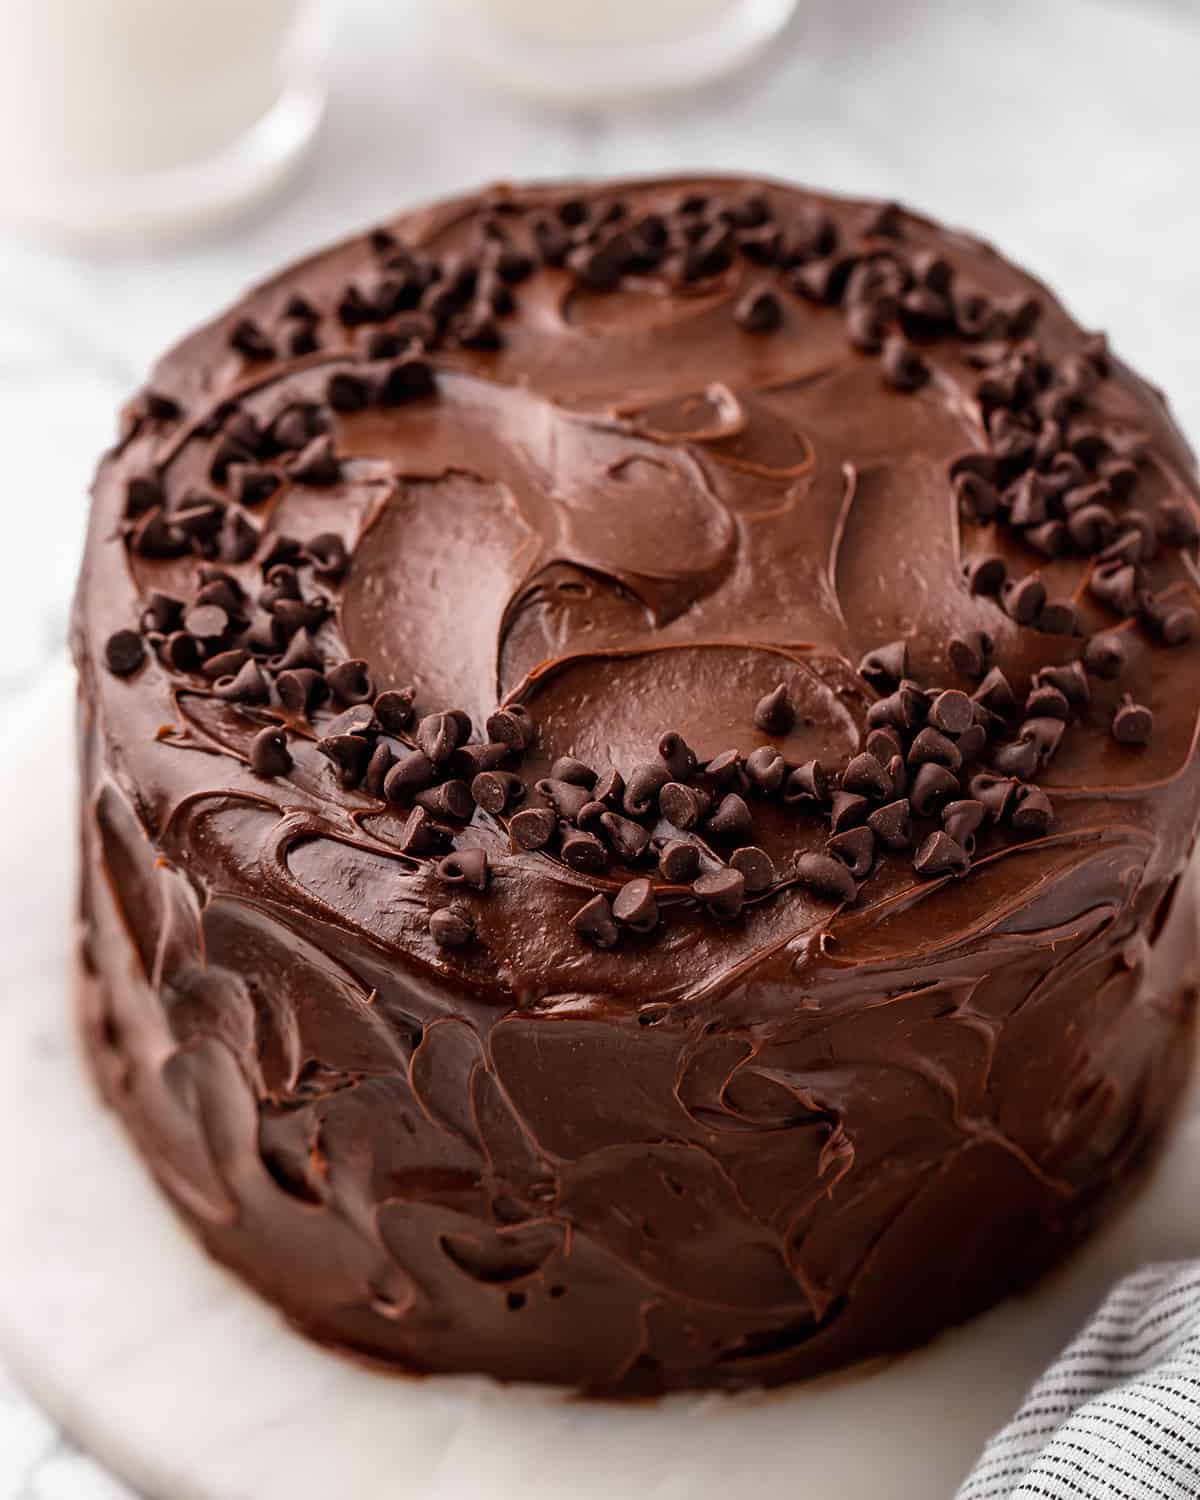 Healthy Chocolate Cake frosting and decorated with chocolate chips